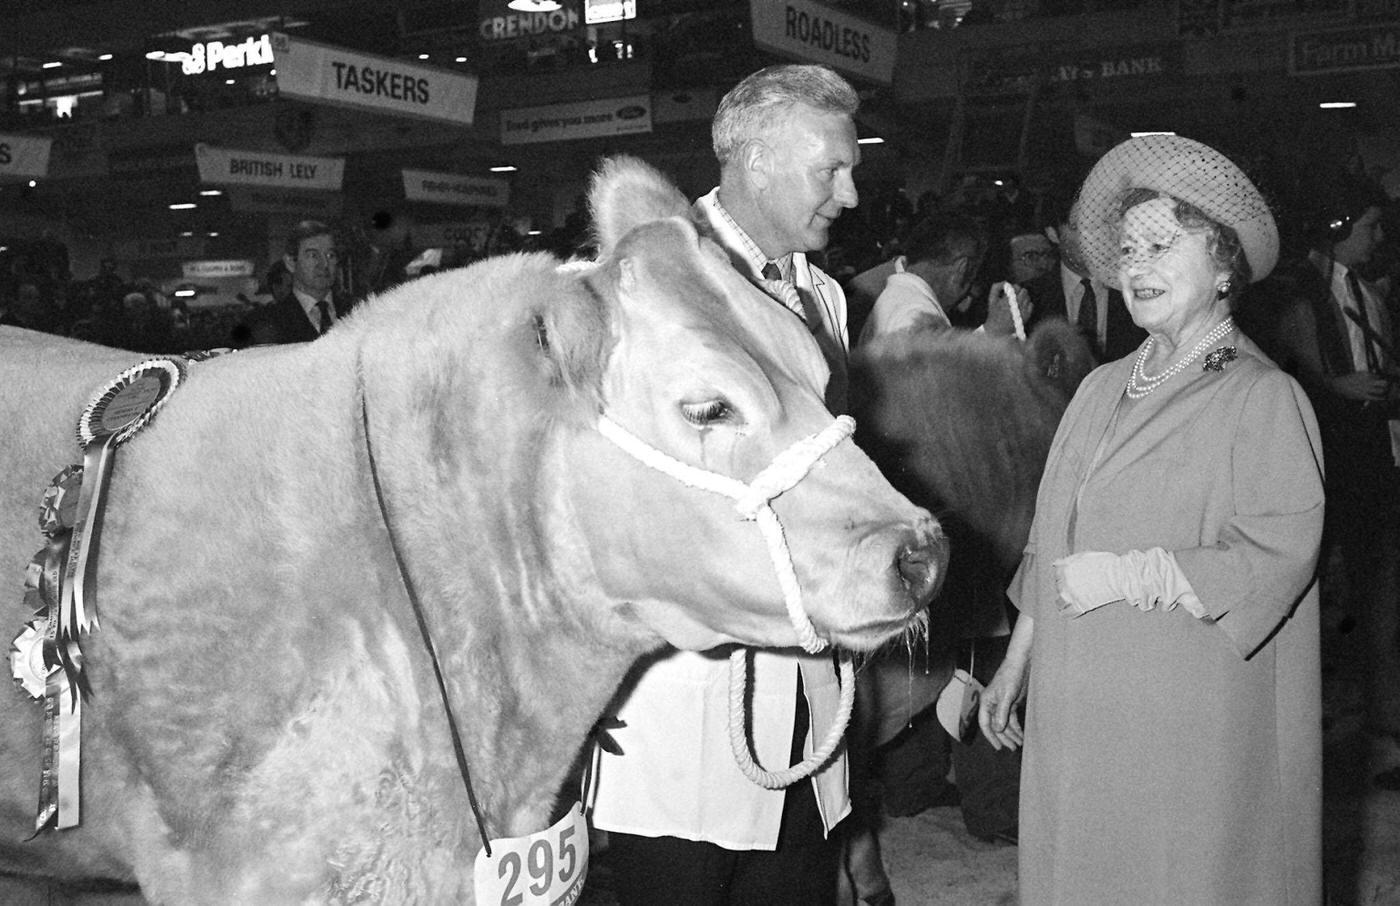 The Queen Mother, during her visit to the Royal Smithfield Show at Earls Court in London, 1959